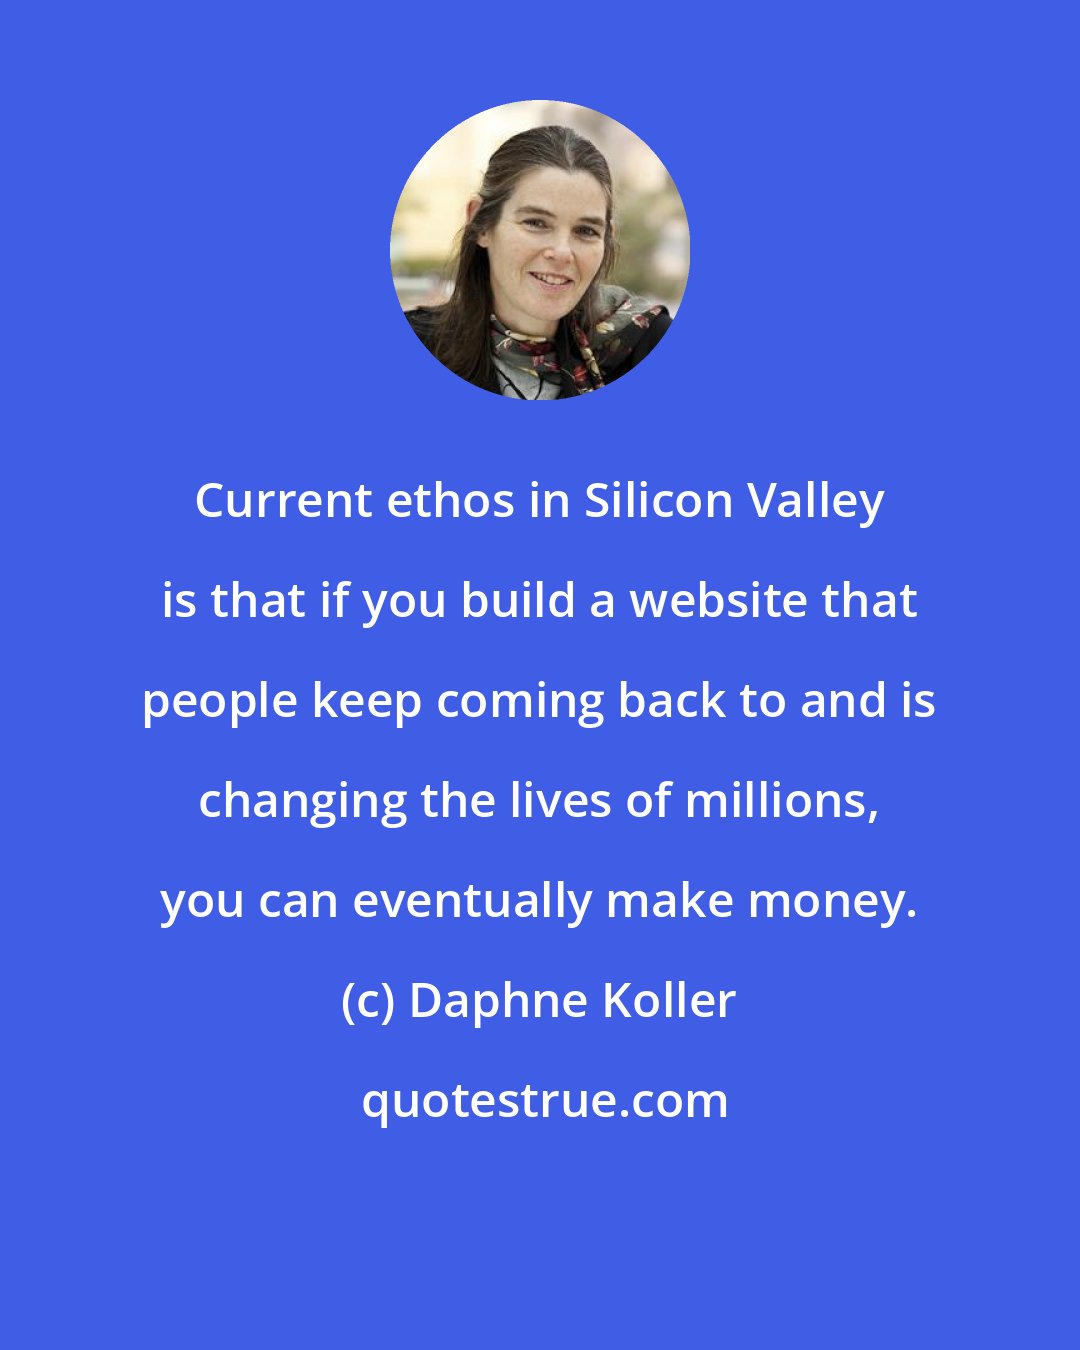 Daphne Koller: Current ethos in Silicon Valley is that if you build a website that people keep coming back to and is changing the lives of millions, you can eventually make money.